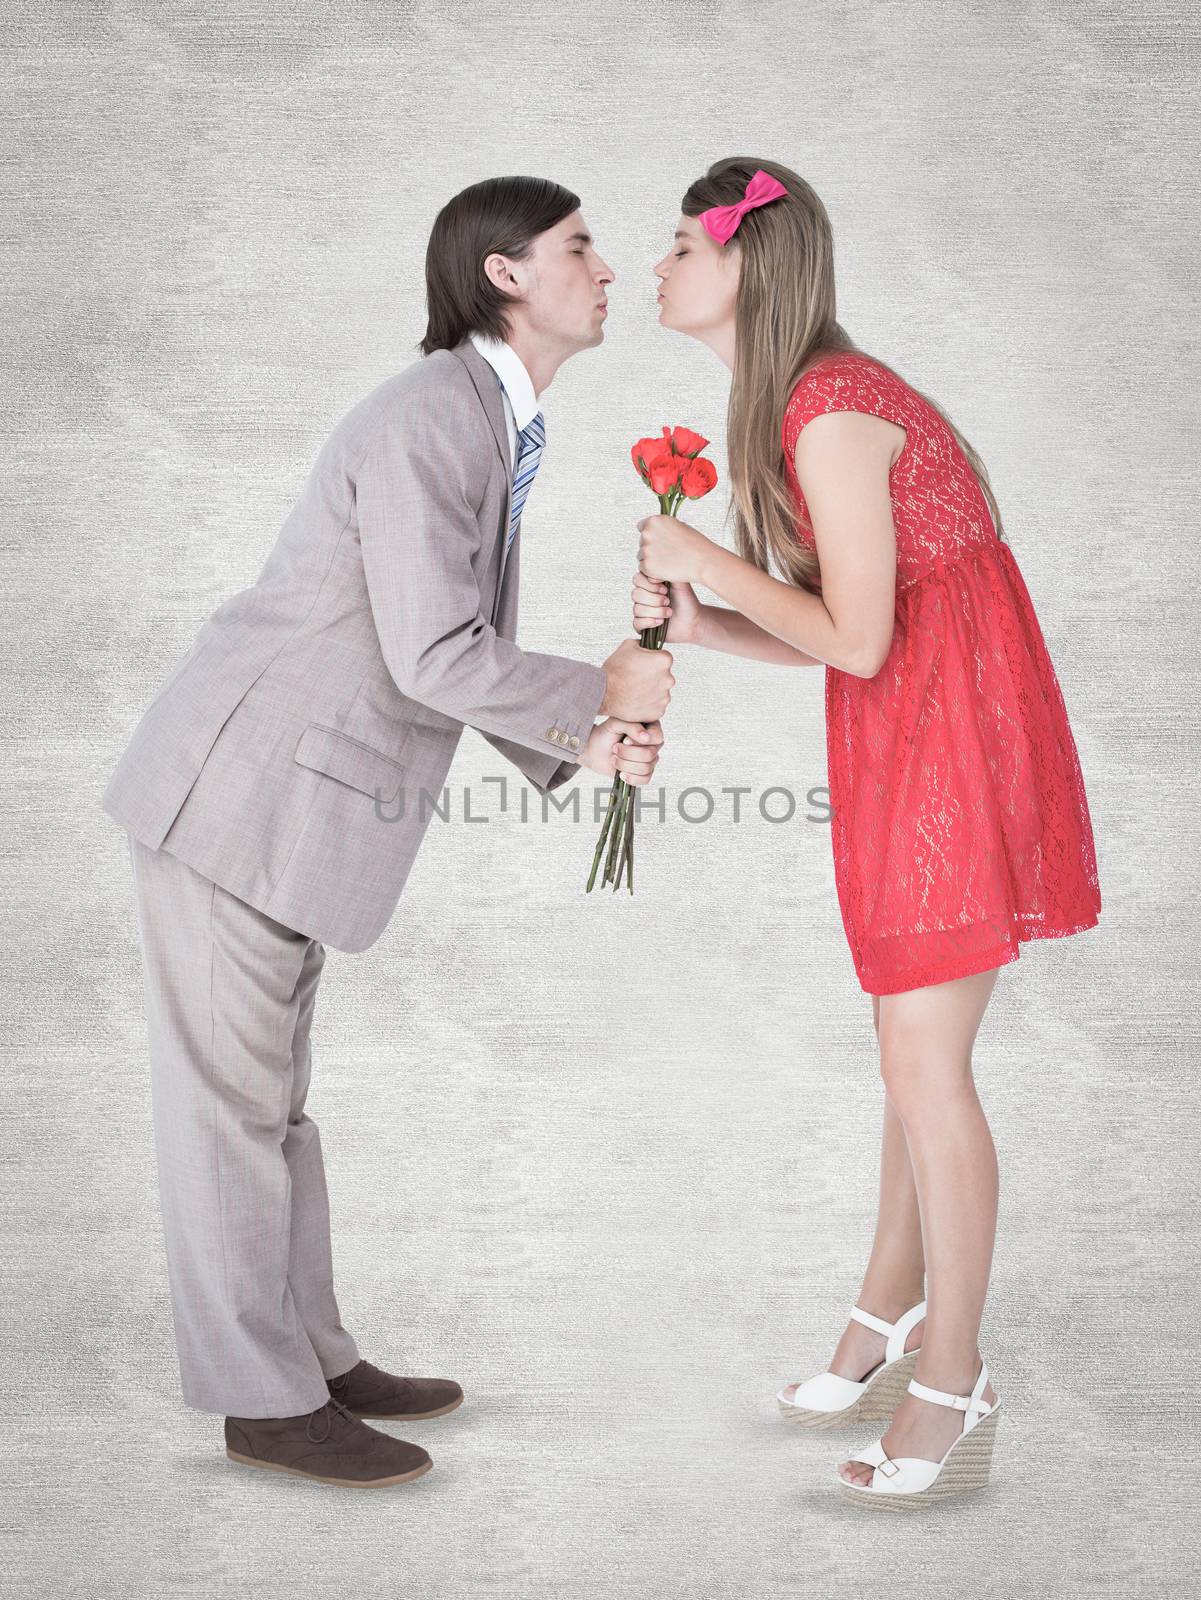 Cute geeky couple kissing against white background